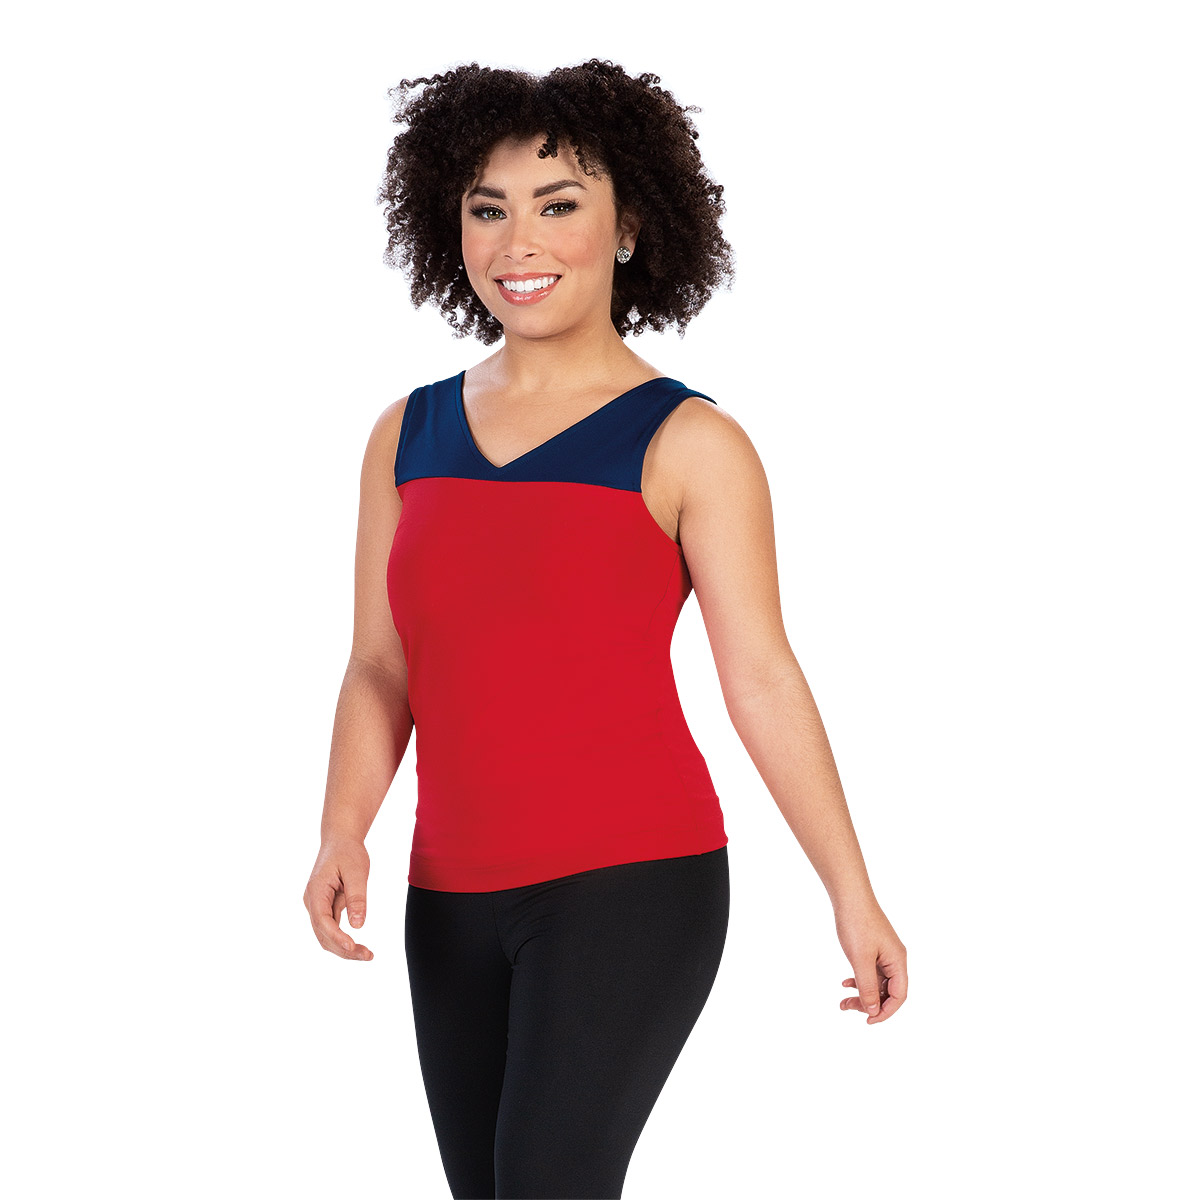 Dance Packages - Tops & Dresses